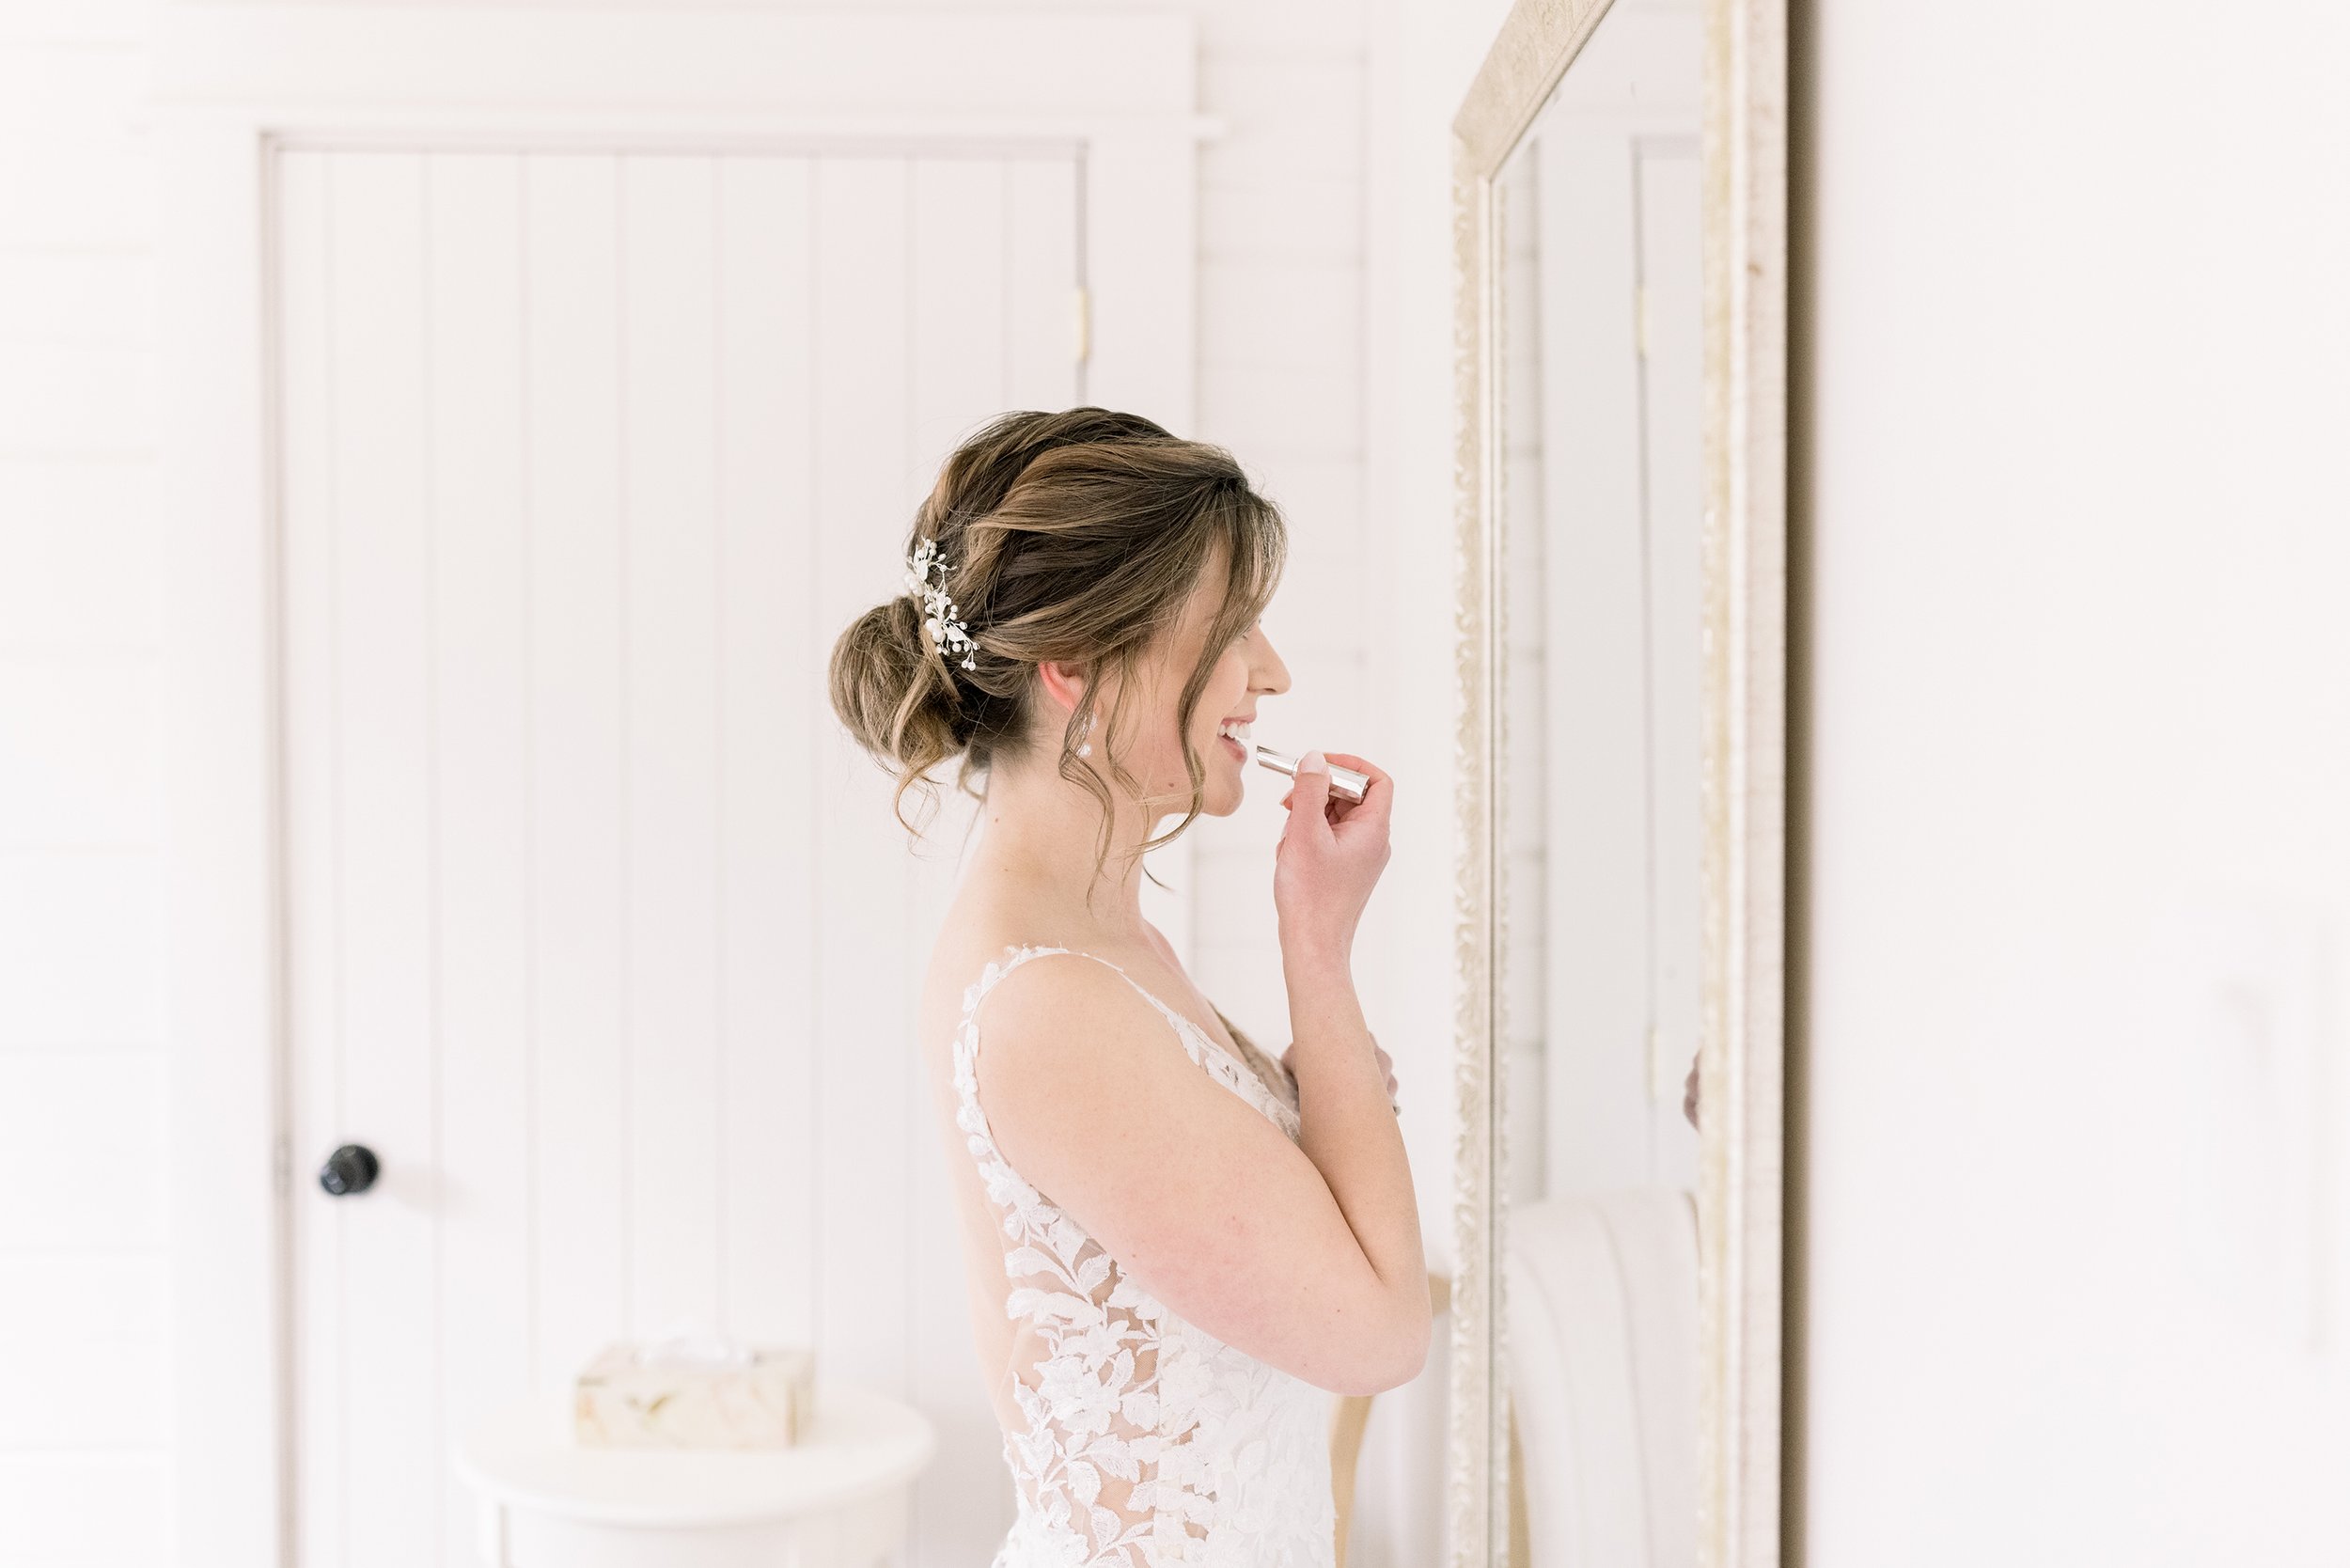  The bride applies her lipgloss in a mirror captured by wedding photographer Chelsea Mason Photography. bride gets ready lipgloss mirror #ChelseaMasonPhotography #ChelseaMasonWeddings #WakefieldWeddings #LeBelvedere #Wakefieldweddingphotographers 